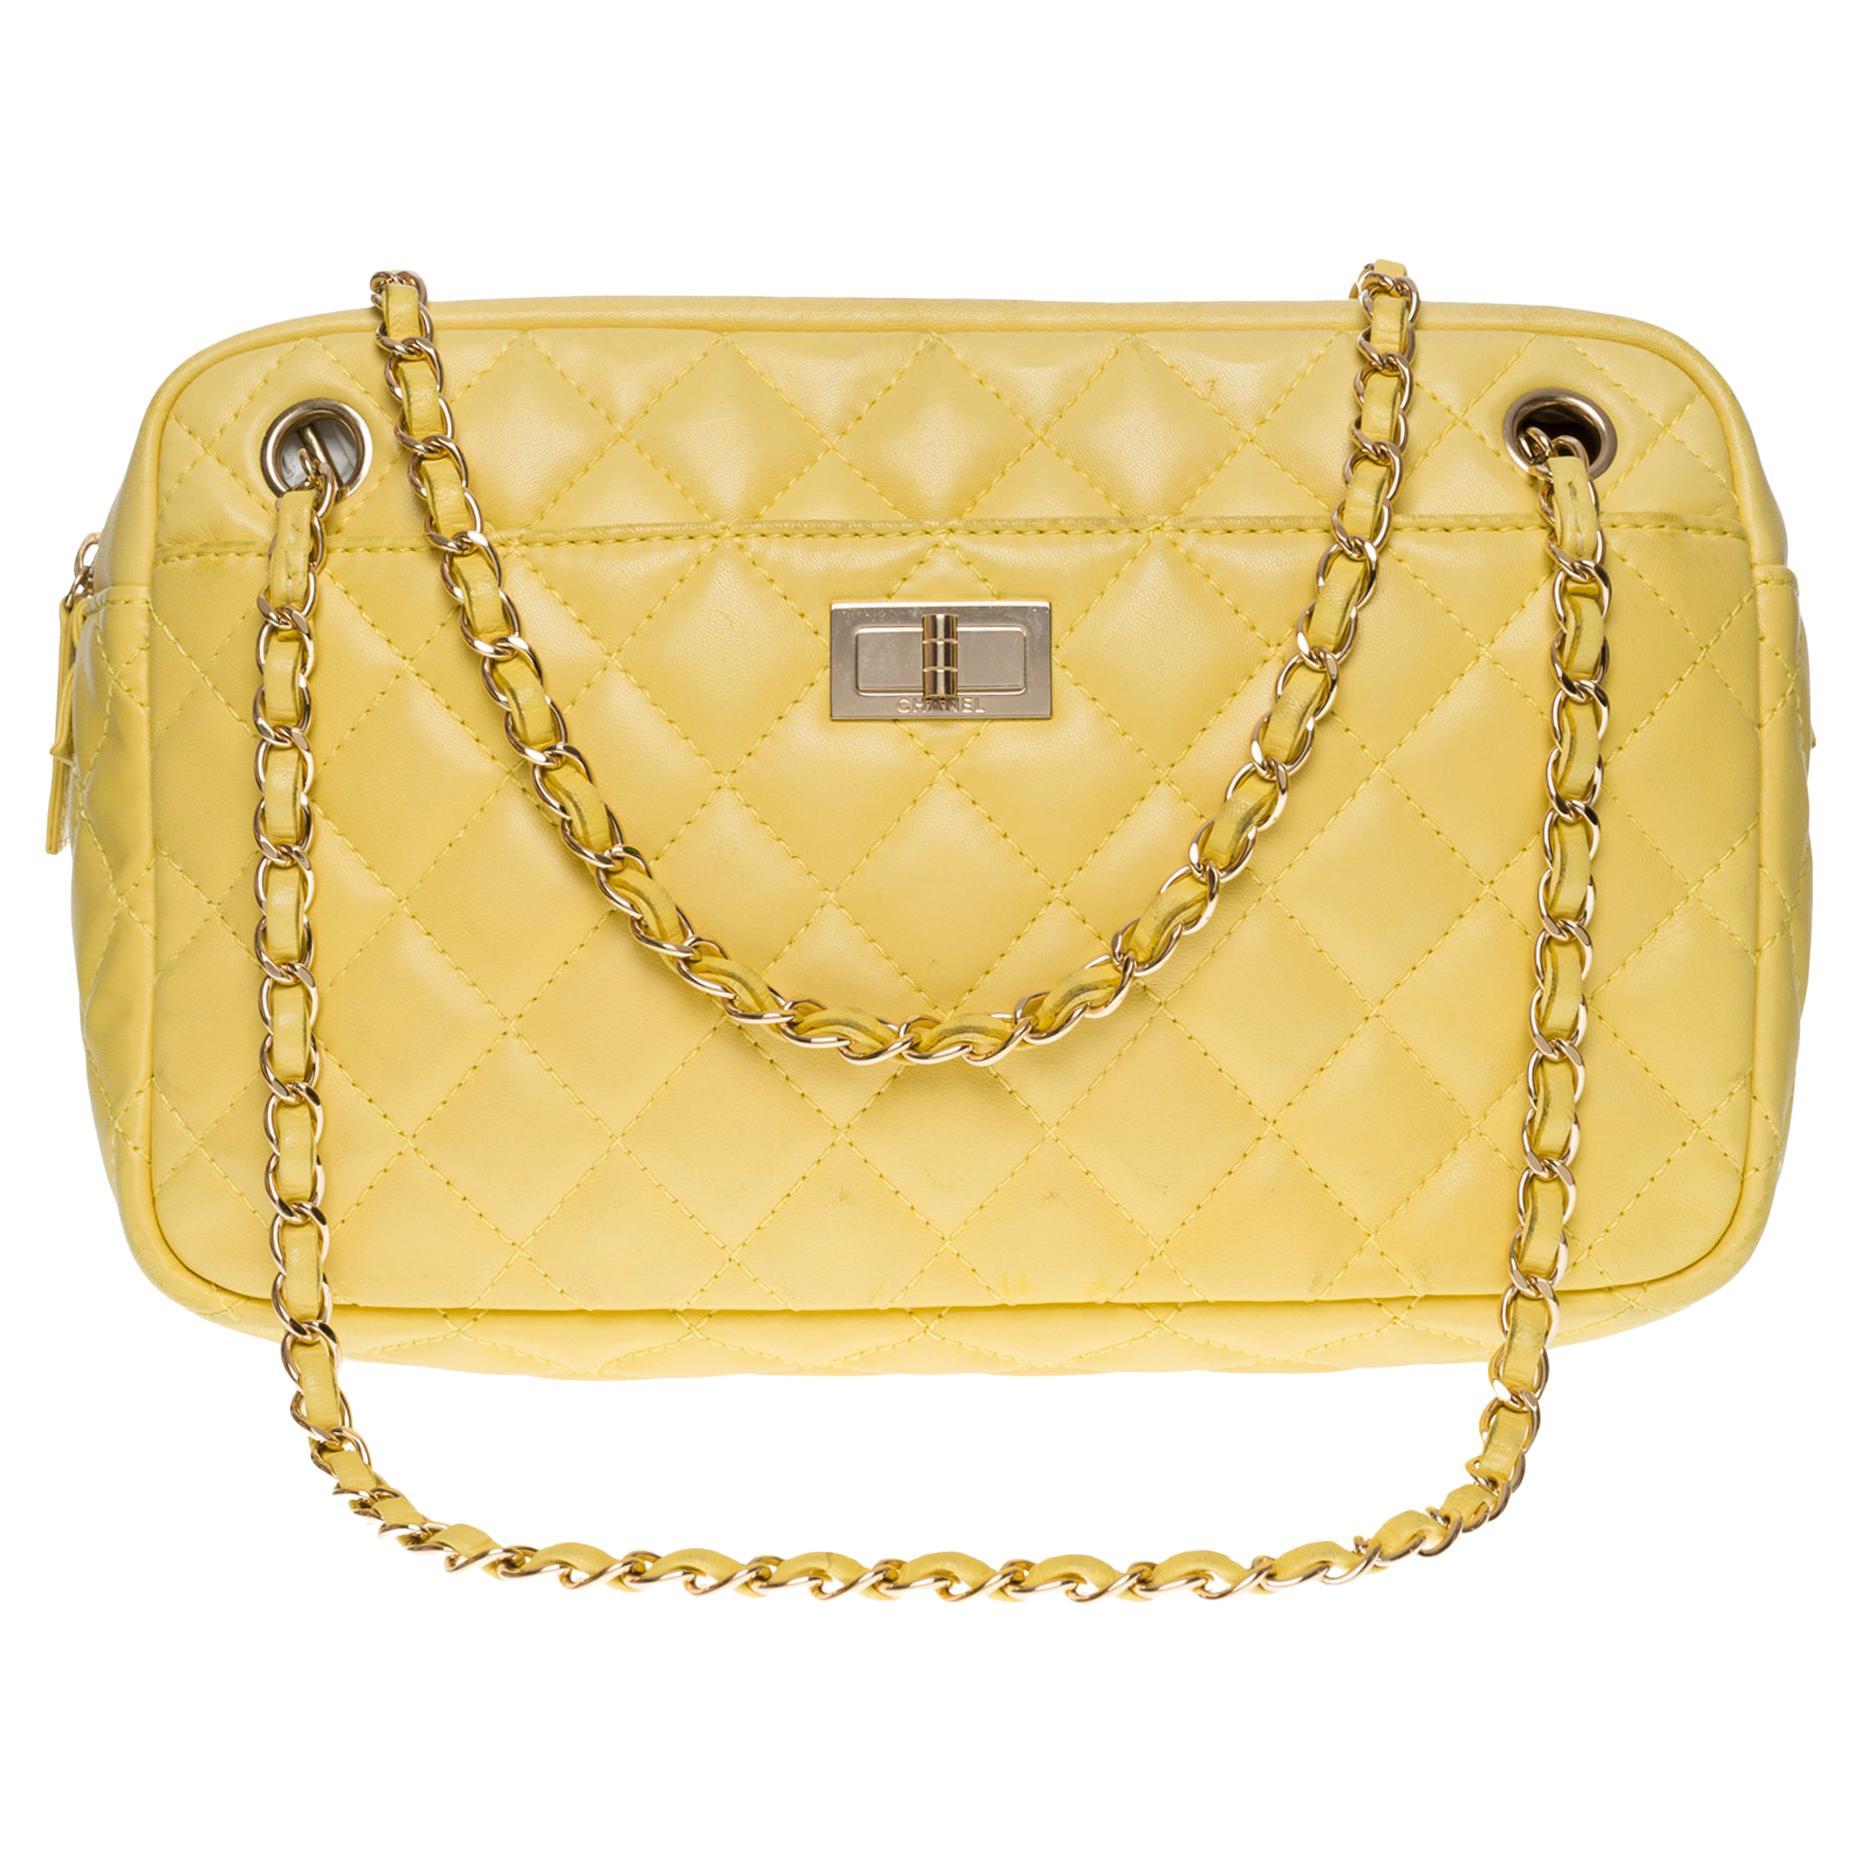 Amazing Chanel Camera shoulder bag in Yellow lime quilted leather, GHW